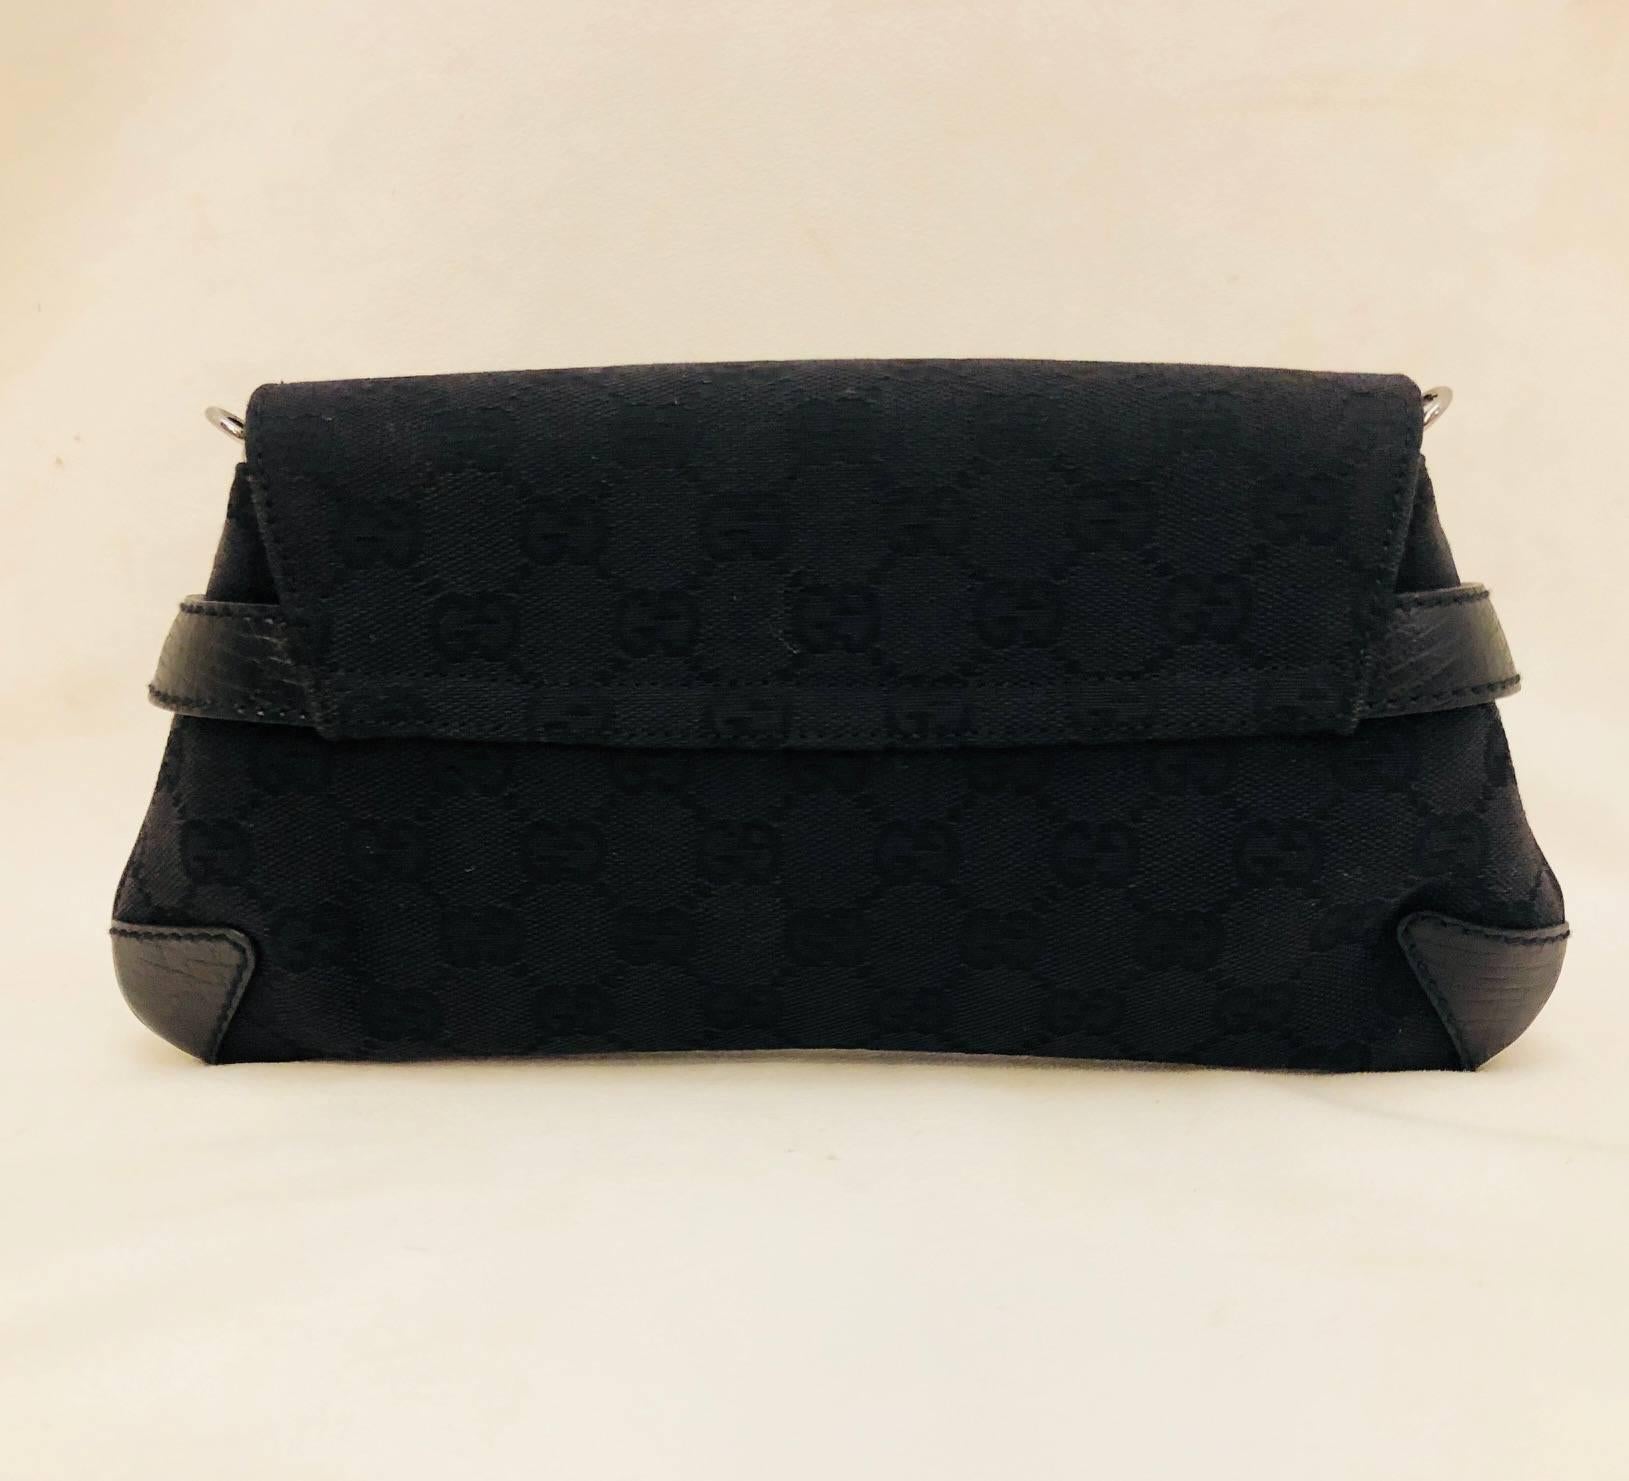 This everyday Gucci black GG canvas horsebit clutch with gunmetal hardware is the correct size for all your essentials, yet you can take it on your evening rendezvous. Contains a single chain-link shoulder strap that can be detached or just inserted